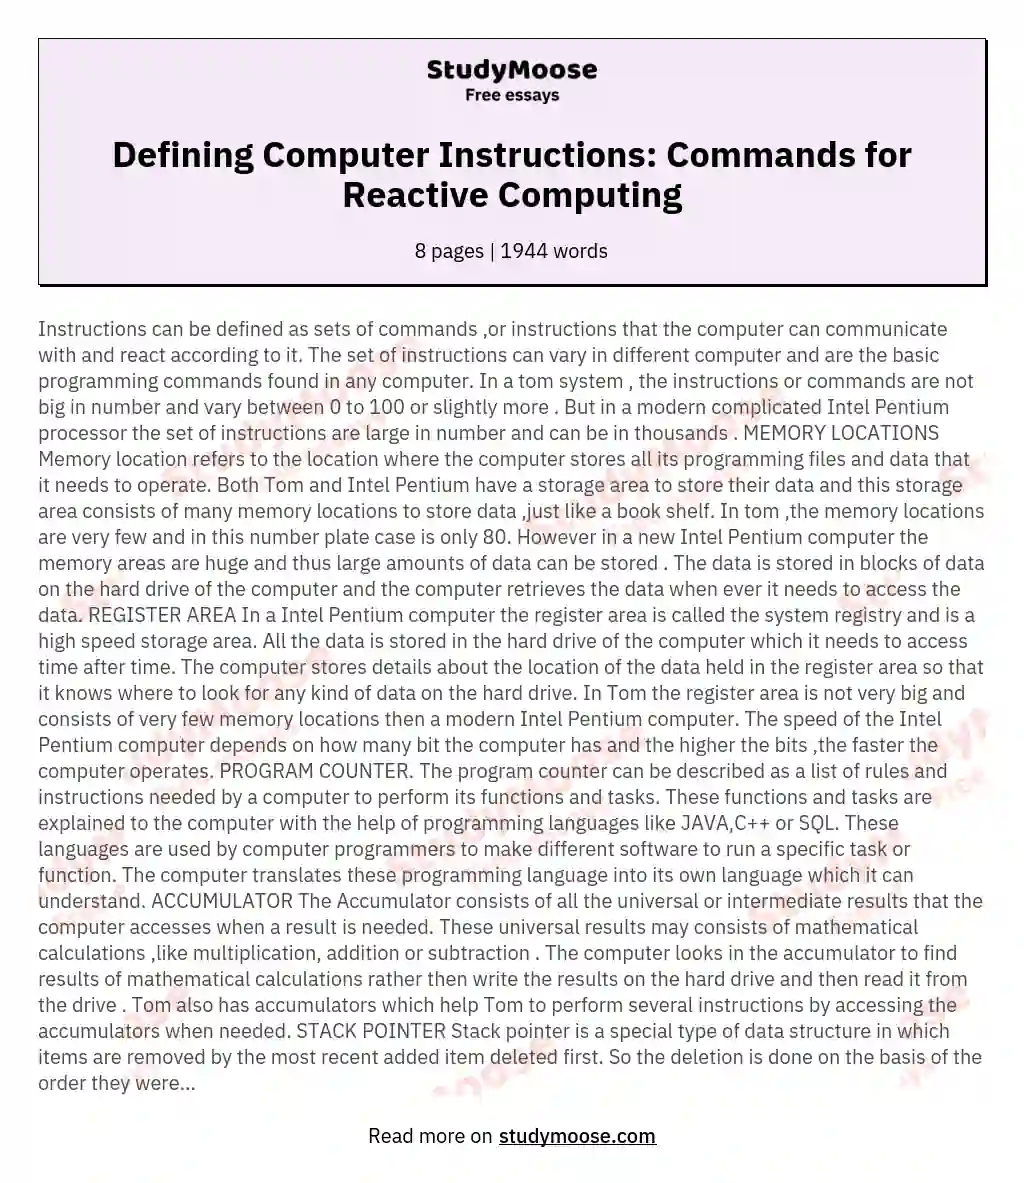 Defining Computer Instructions: Commands for Reactive Computing essay